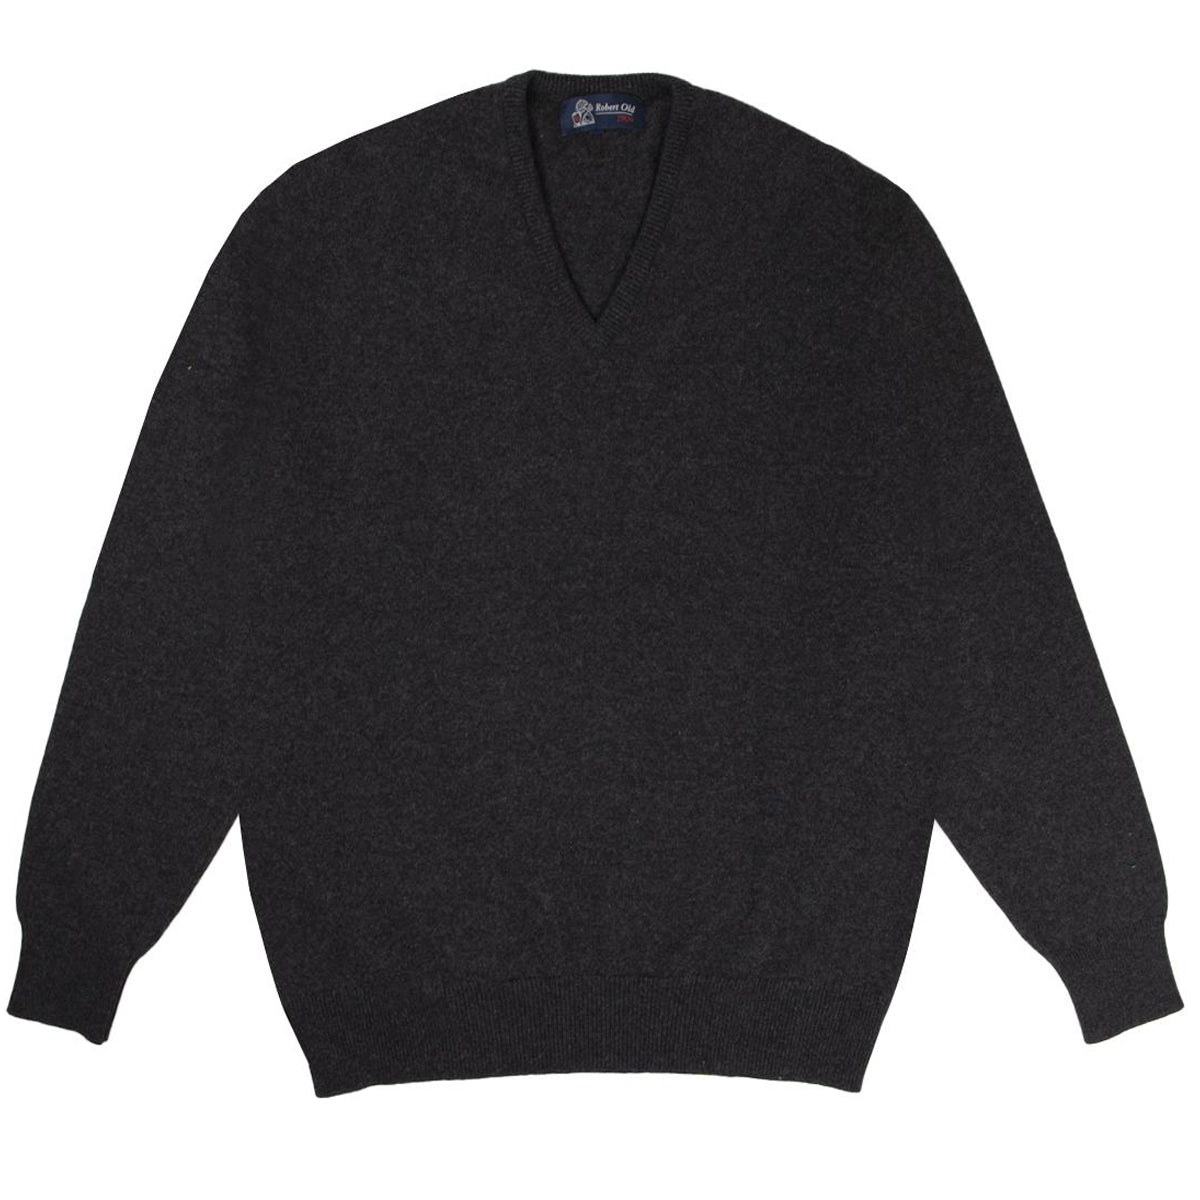 Charcoal Tobermorey 4ply V-Neck Cashmere Sweater  Robert Old   